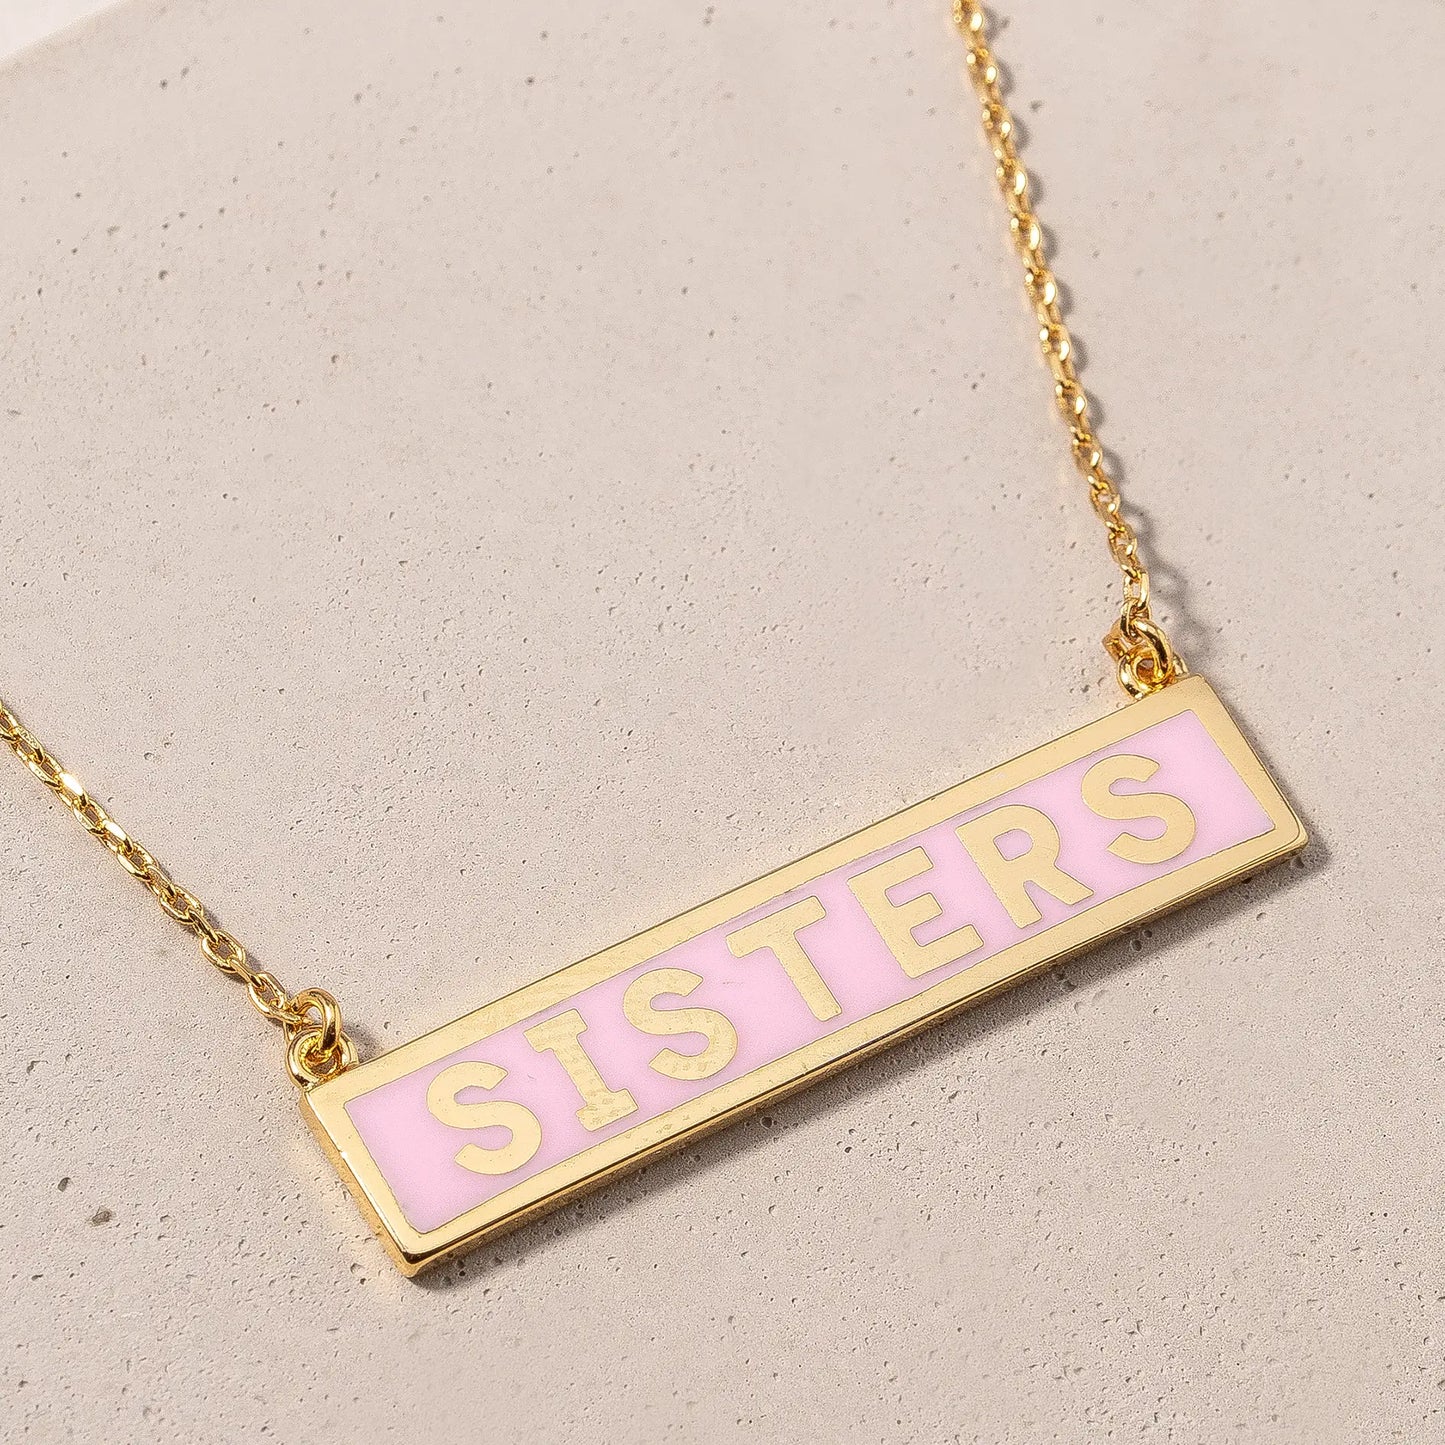 Sisters Necklace | Sisters Tag Charm | Sorella Amore